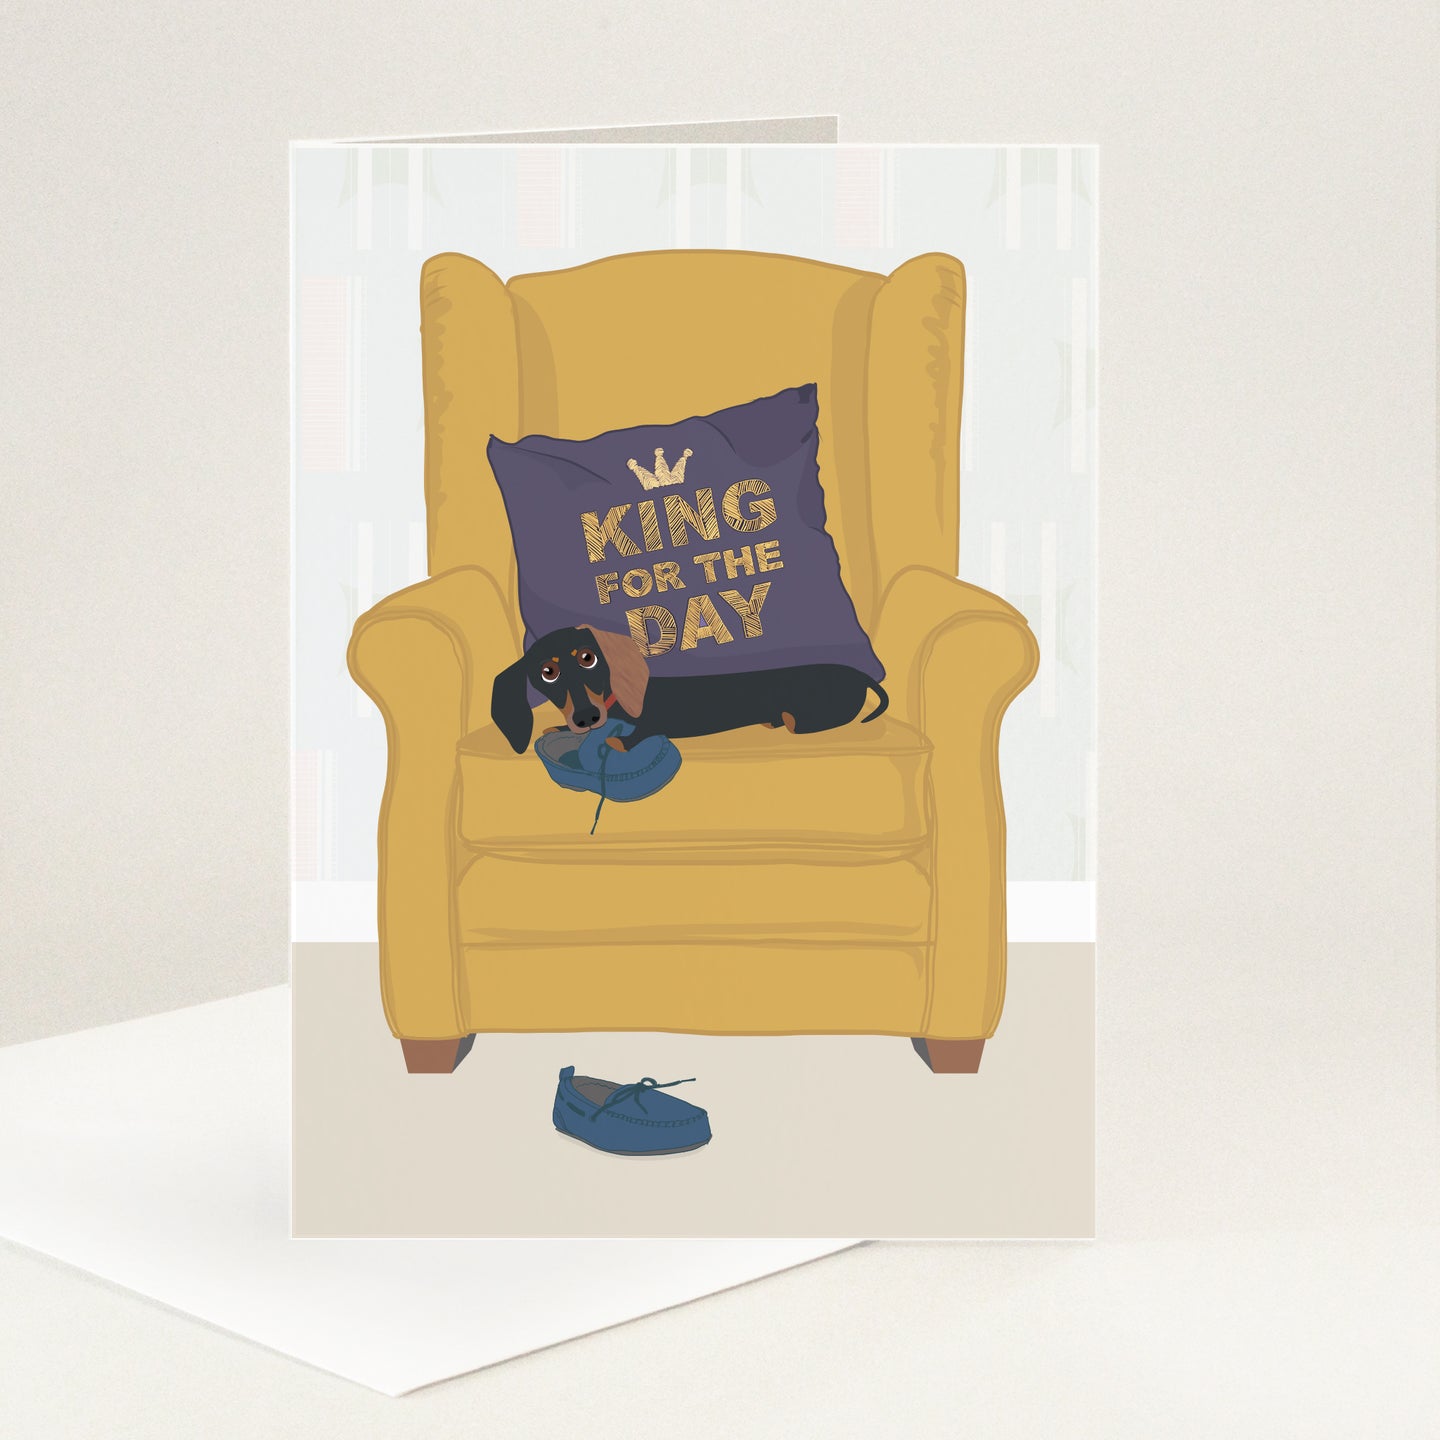 King for the Day embroidered onto a purple cushion on a gold armchair with a sausage dog laying on the chair and chewing one of a pair of blue moccasin slippers. 